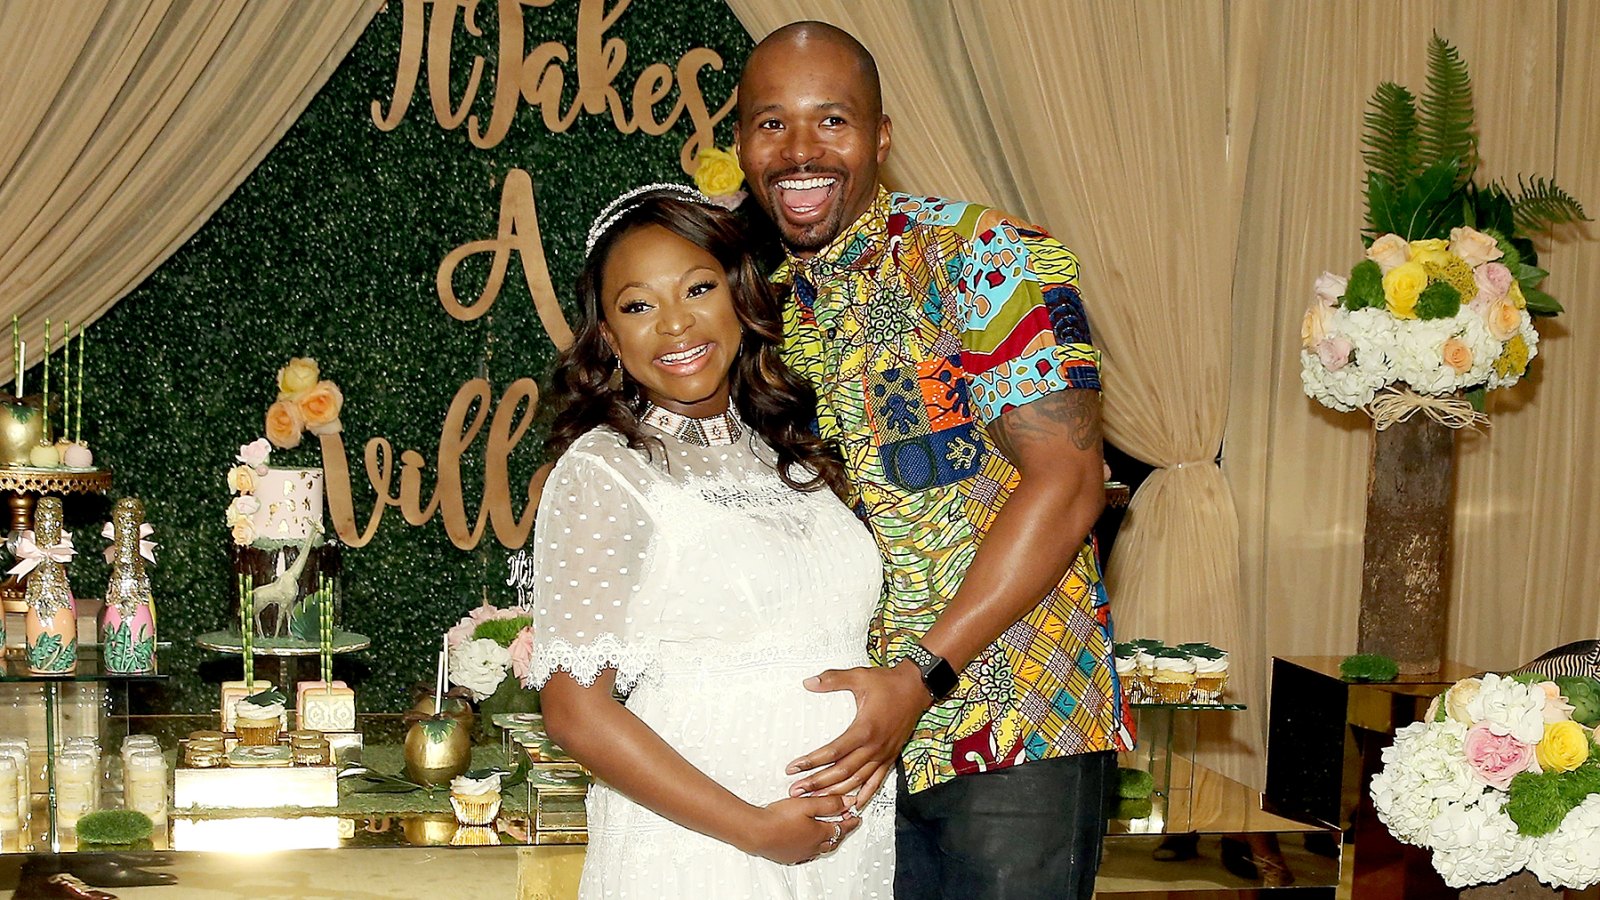 Naturi Naughton and Benjamin pose for a photo during her Baby Shower at The Dazzler Hotel on May 7, 2017 in the Brooklyn borough of New York City.